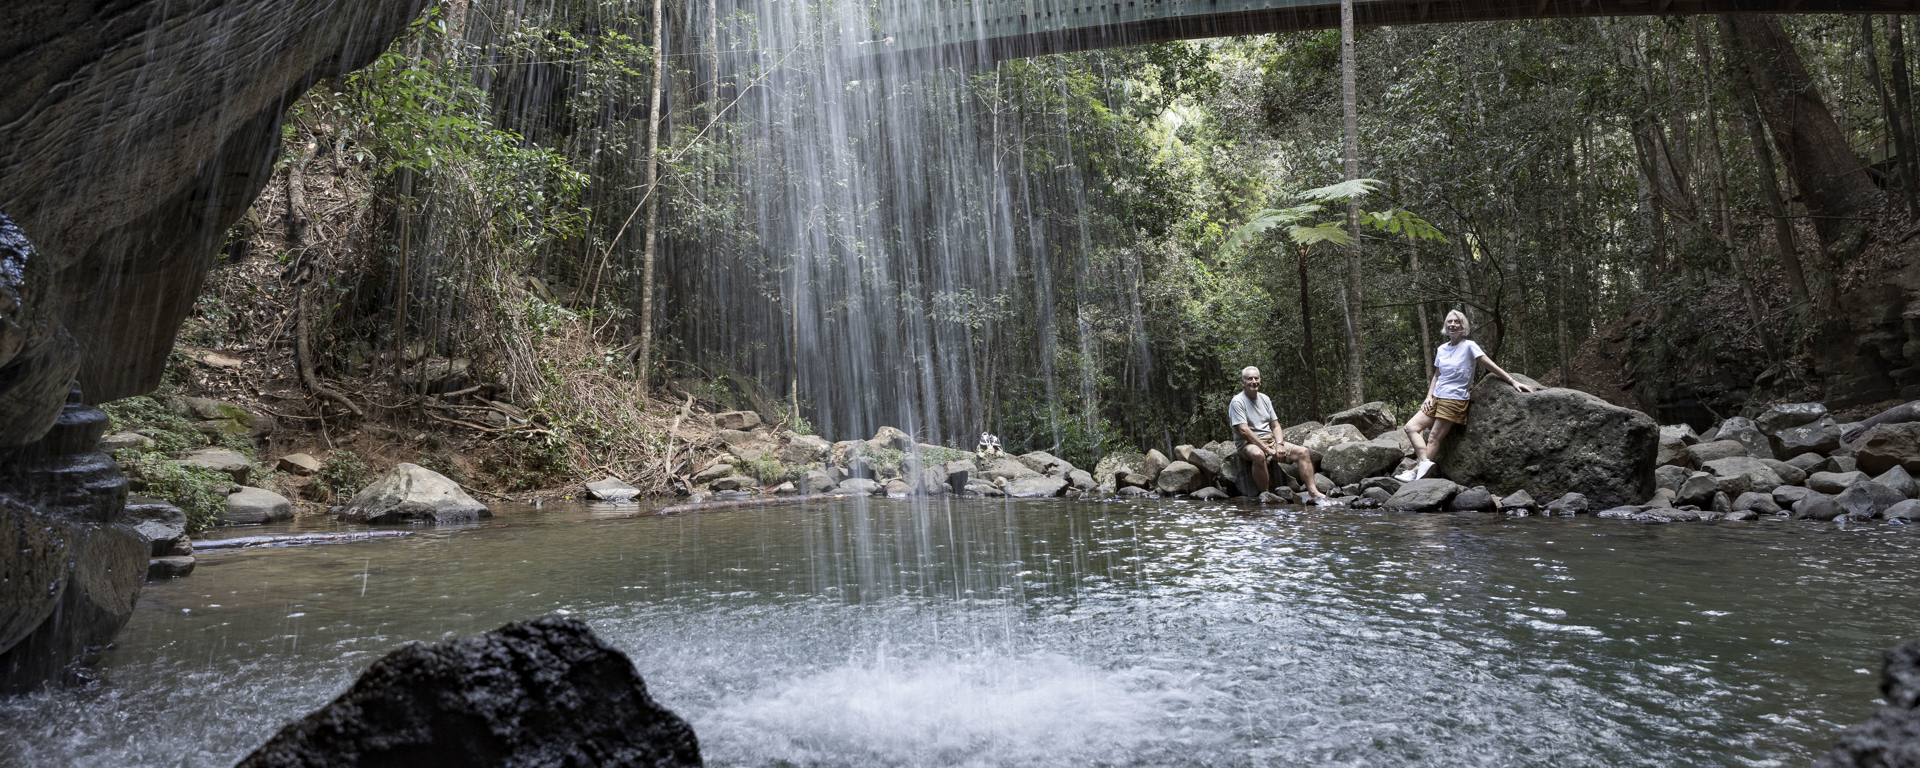 A man and woman relax by the base of a waterfall within the Buderim rainforest underneath a bridge on a cloudy day.